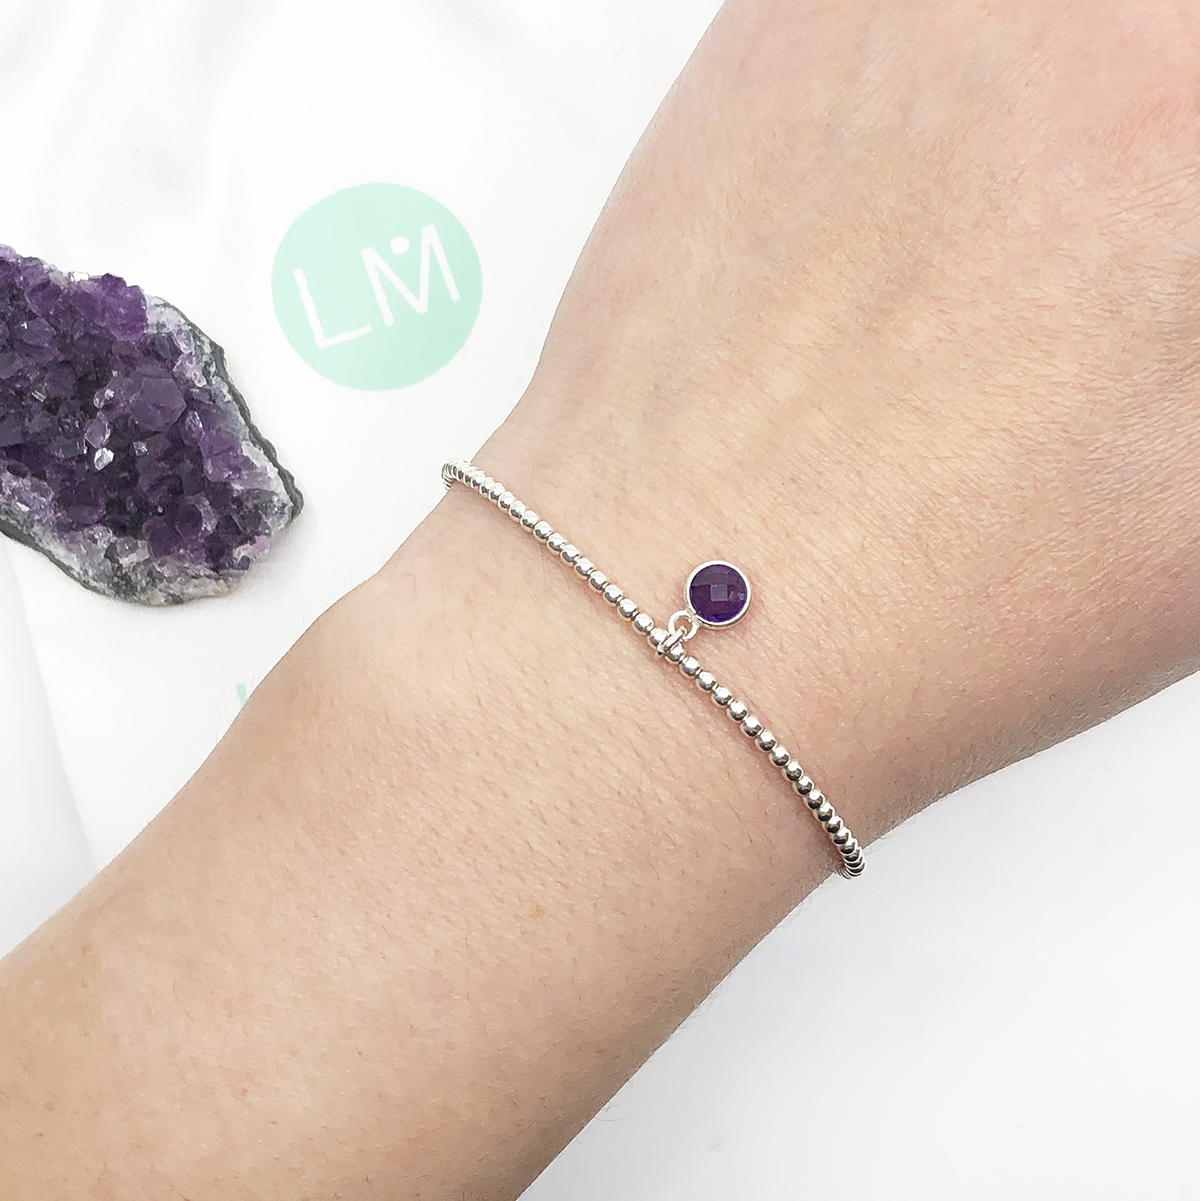 Dainty sterling silver beaded stretch bracelet featuring a natural amethyst charm encased in sterling silver.